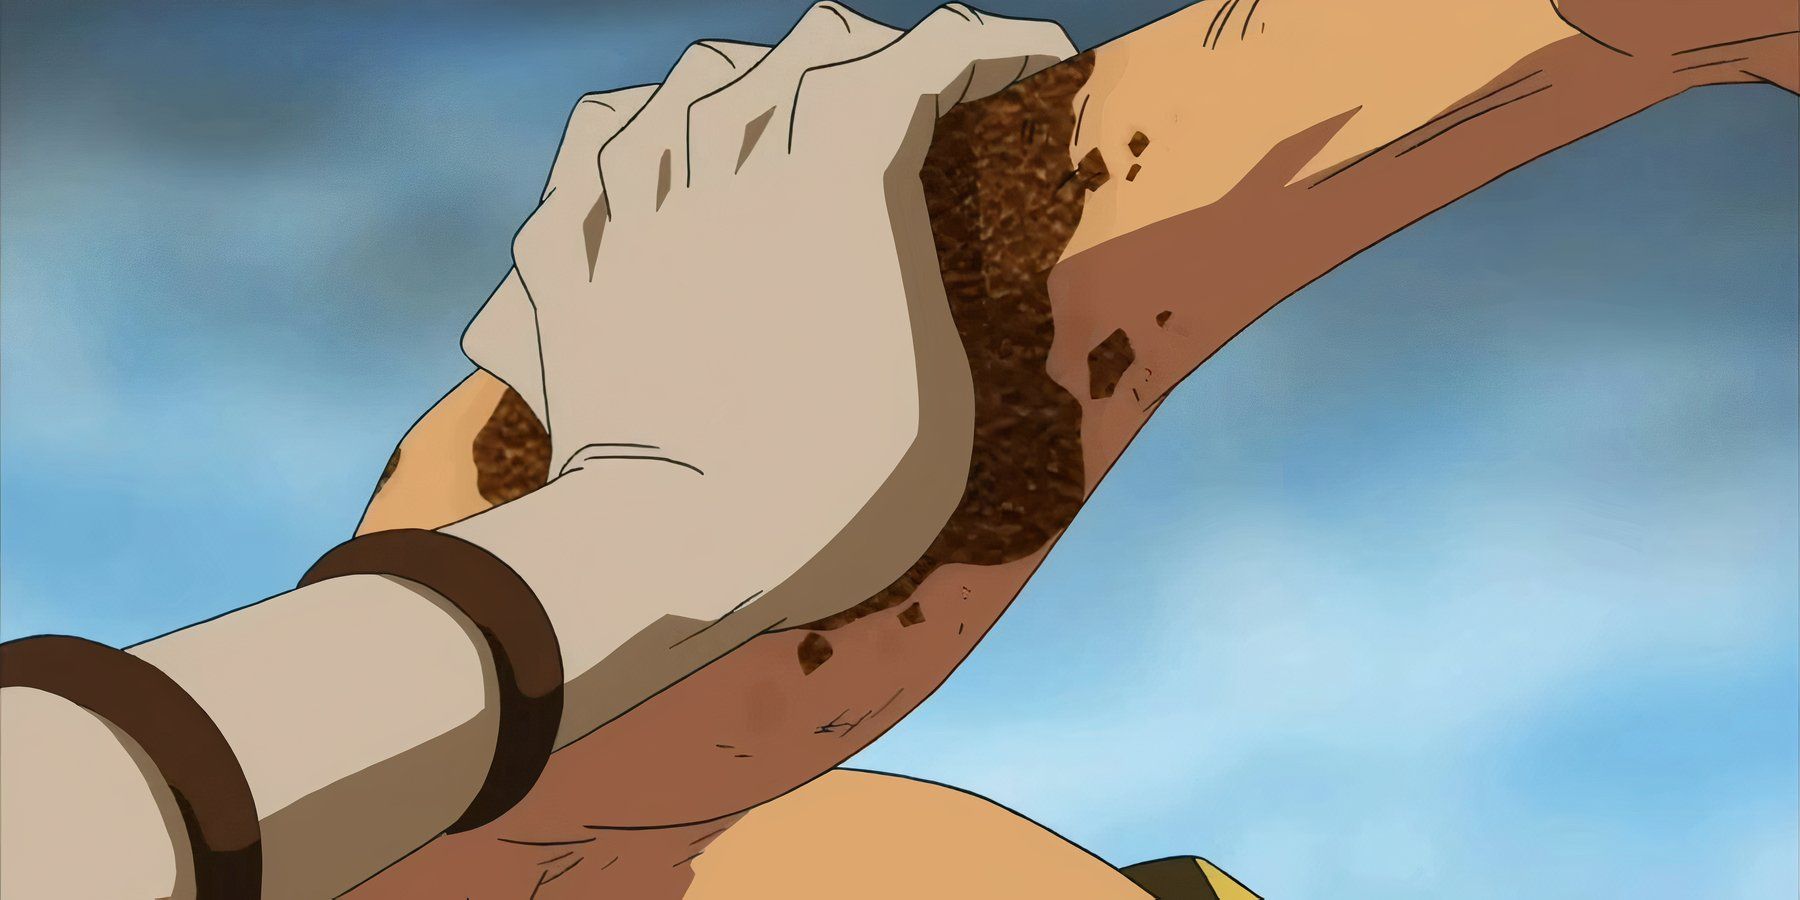 The Rust-Rust Fruit is used to rust Zoro's joints during One Piece's Enies Lobby Arc.